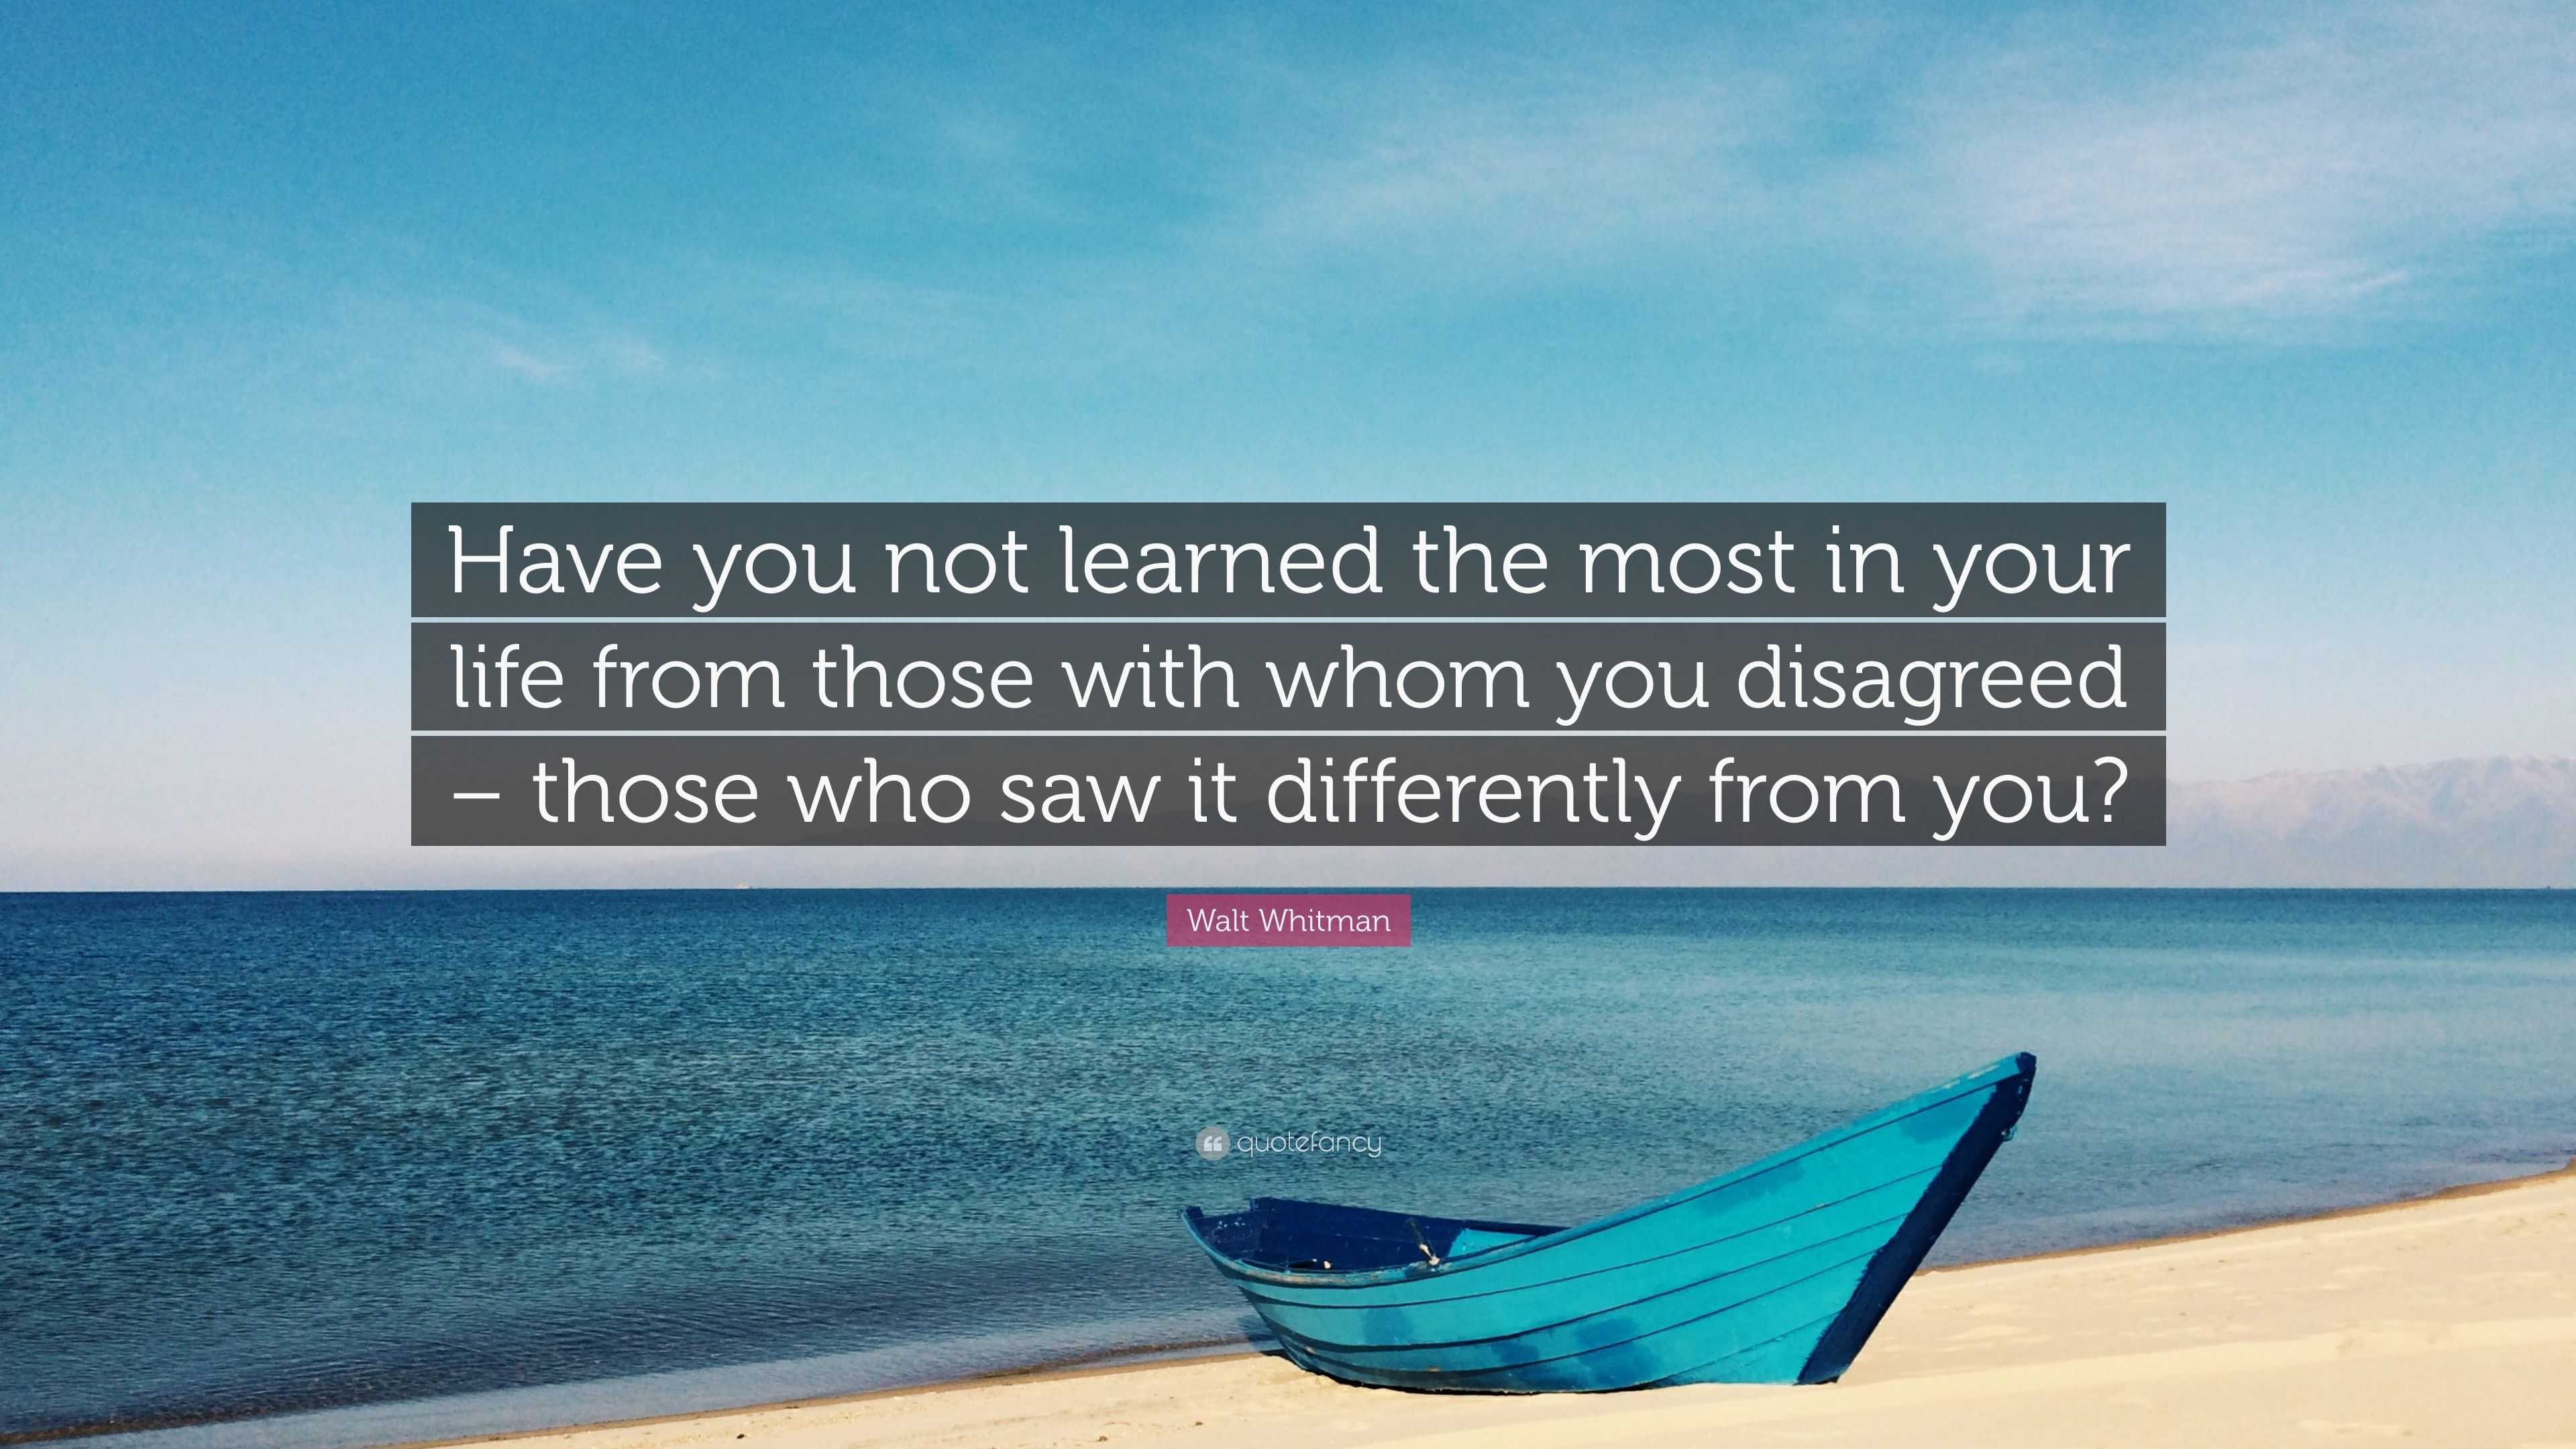 Walt Whitman Quote: “Have you not learned the most in your life from ...